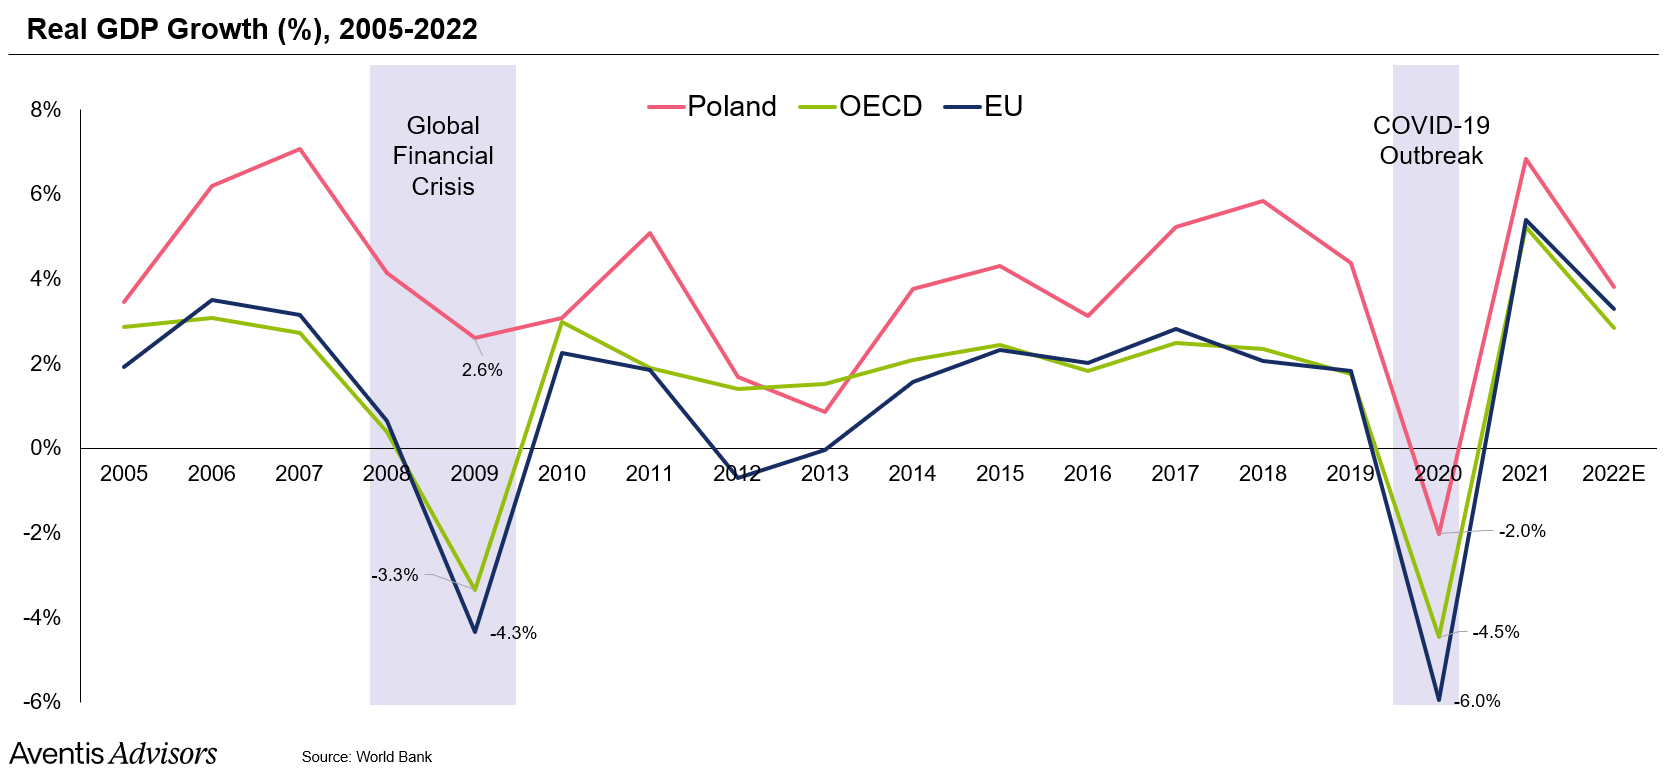 Real GDP growth in Poland